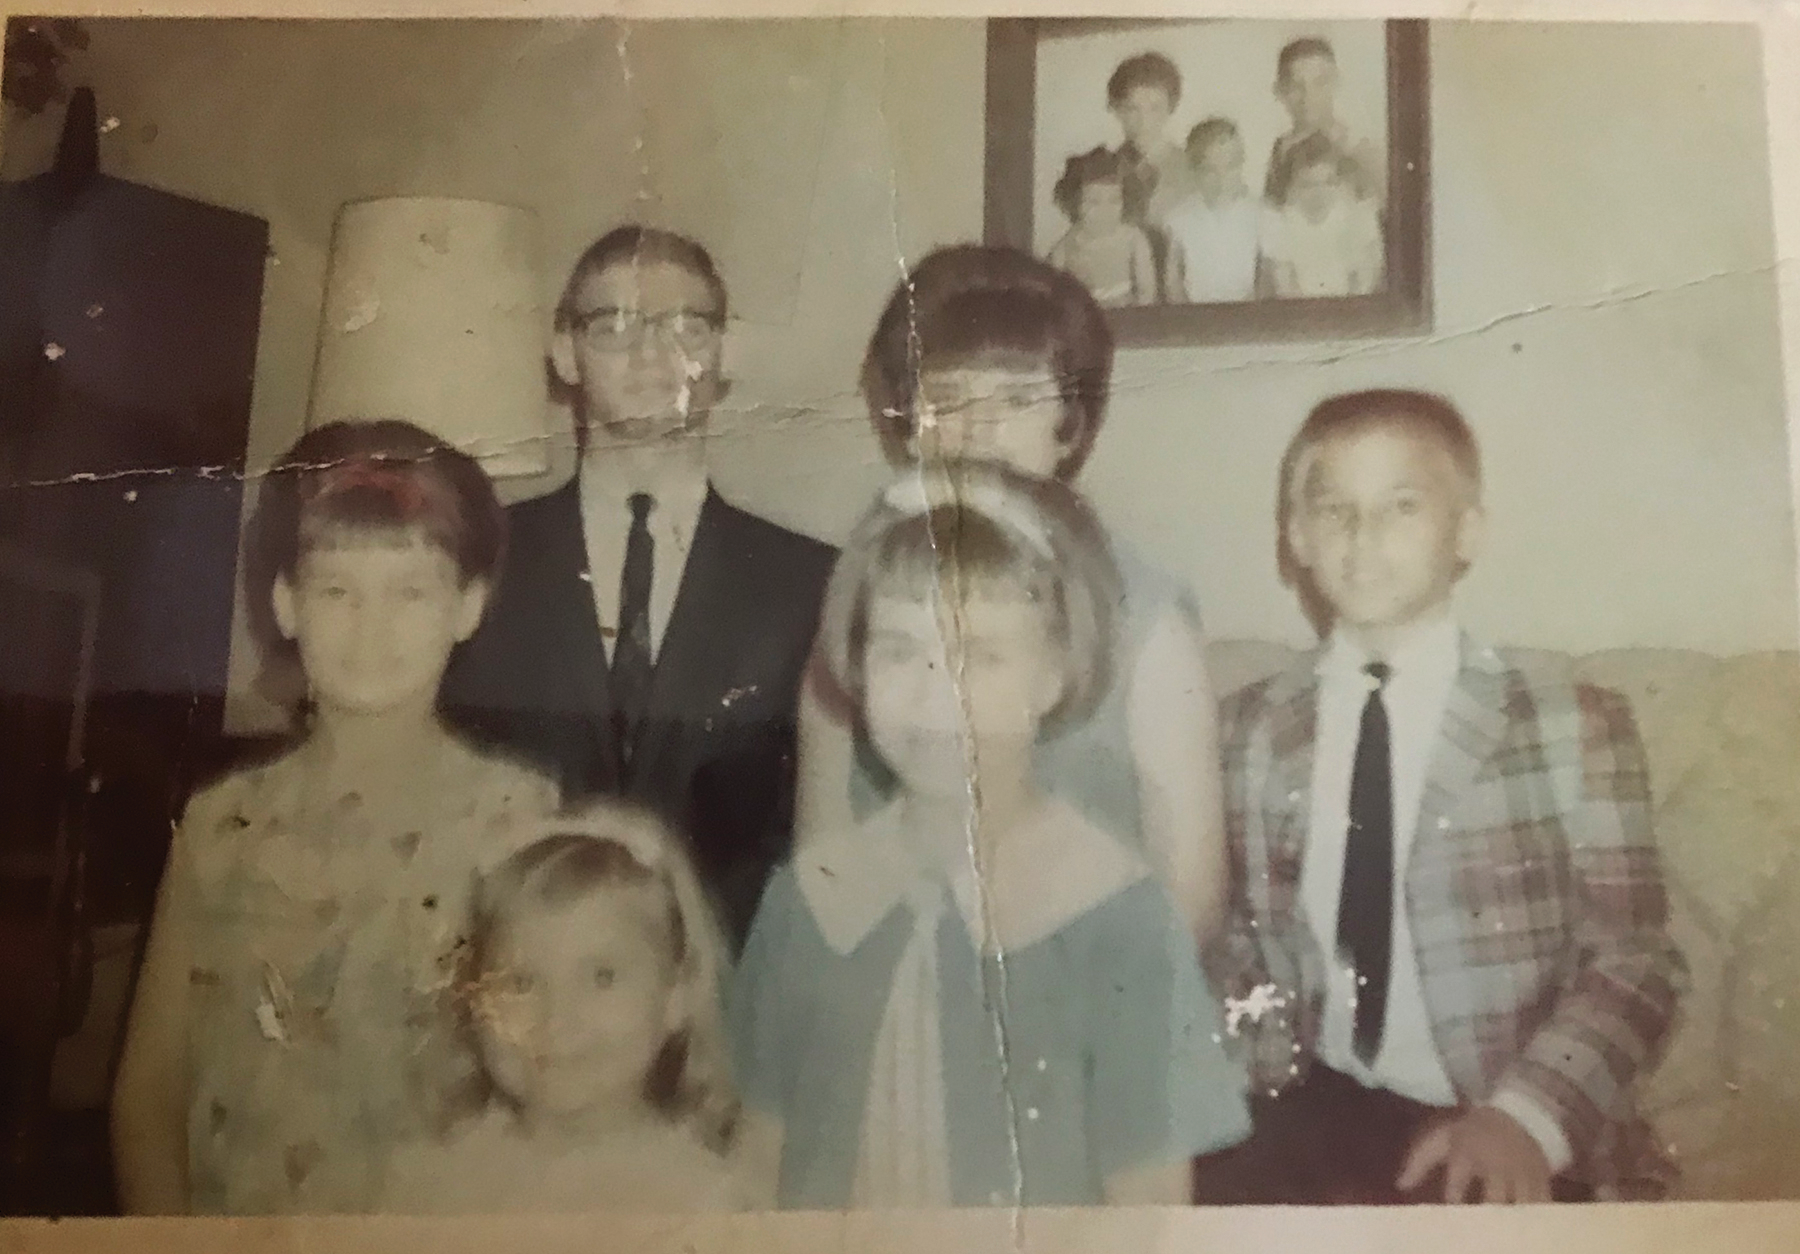 This family photo shows all six Gonsoulin siblings. Dianne is the youngest, pictured bottom left; Donna is in the center front, in a blue dress.